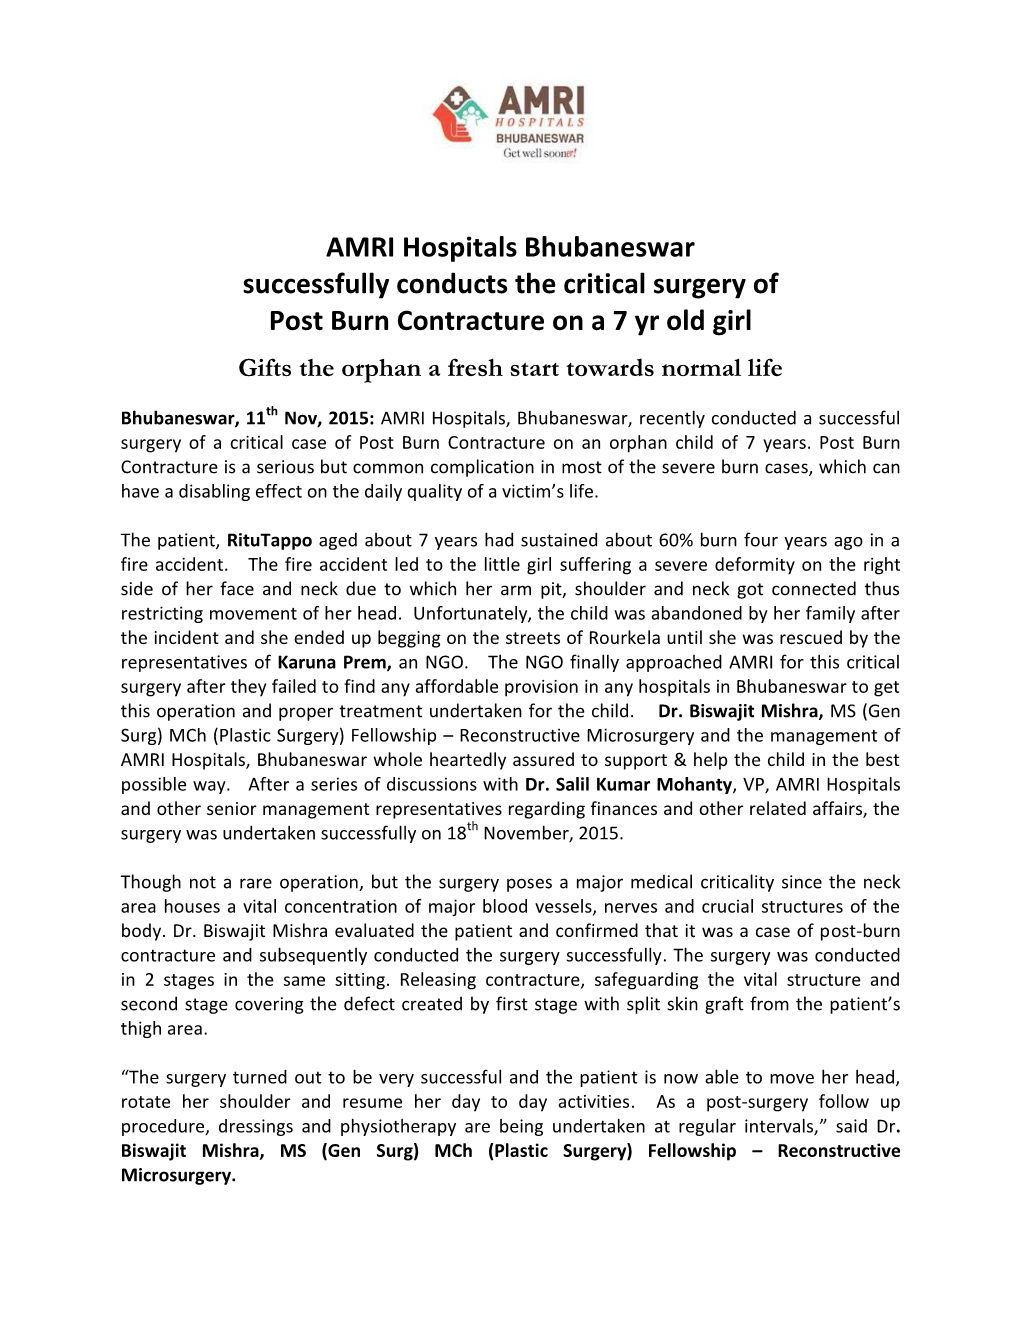 AMRI Hospitals Bhubaneswar Successfully Conducts the Critical Surgery of Post Burn Contracture on a 7 Yr Old Girl